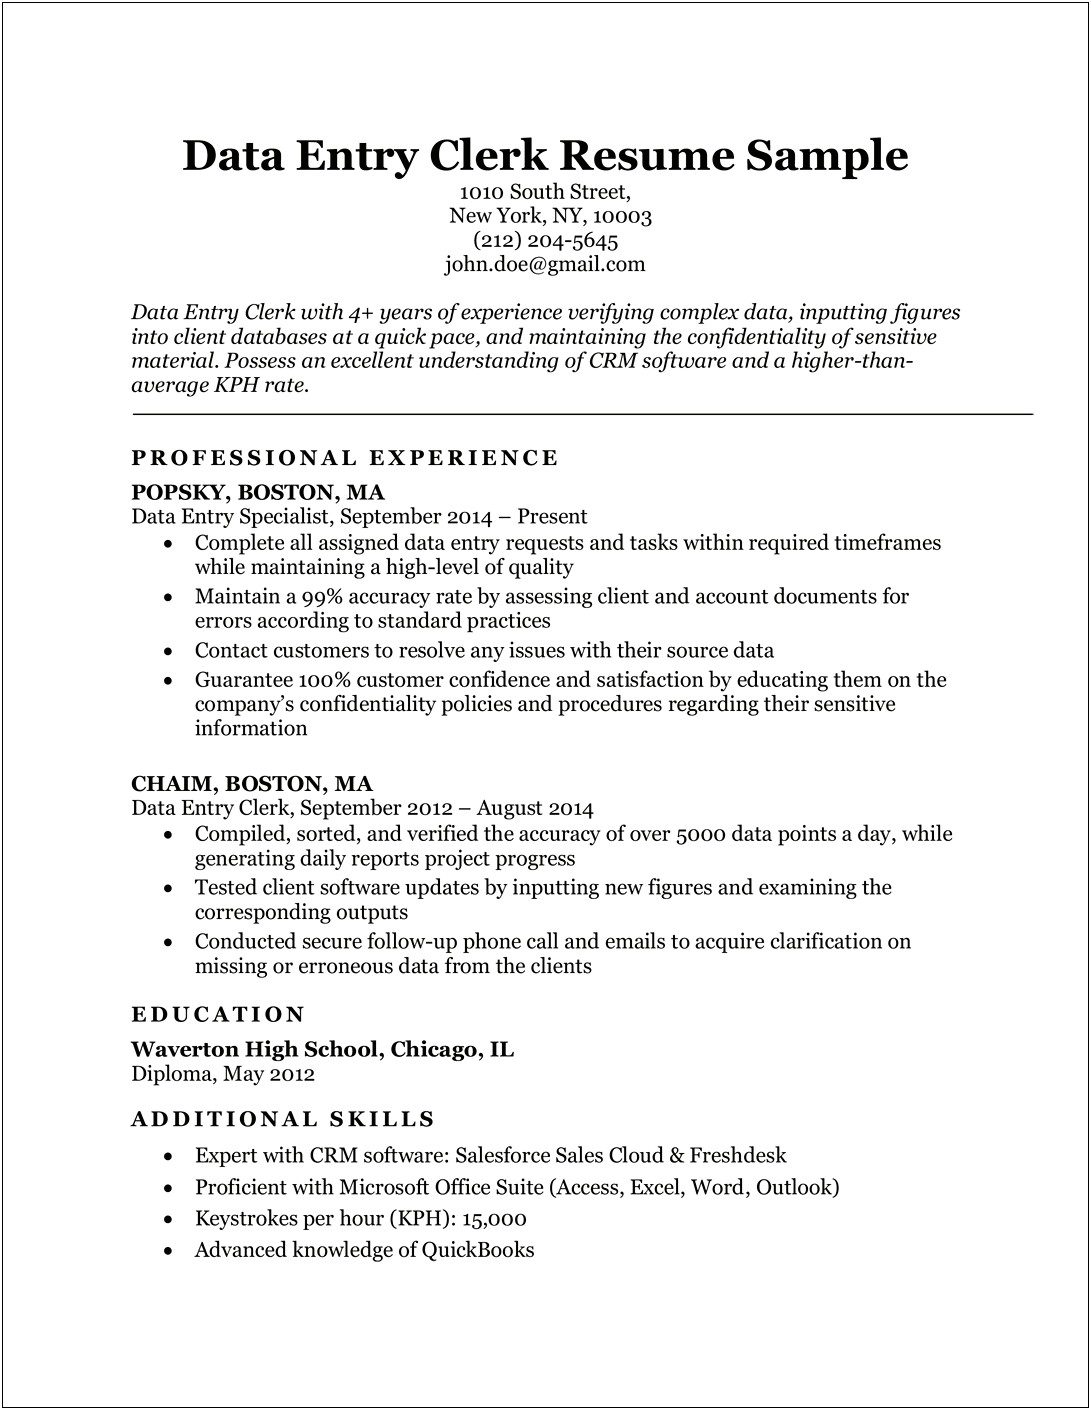 Sample Resume With Professional Experience